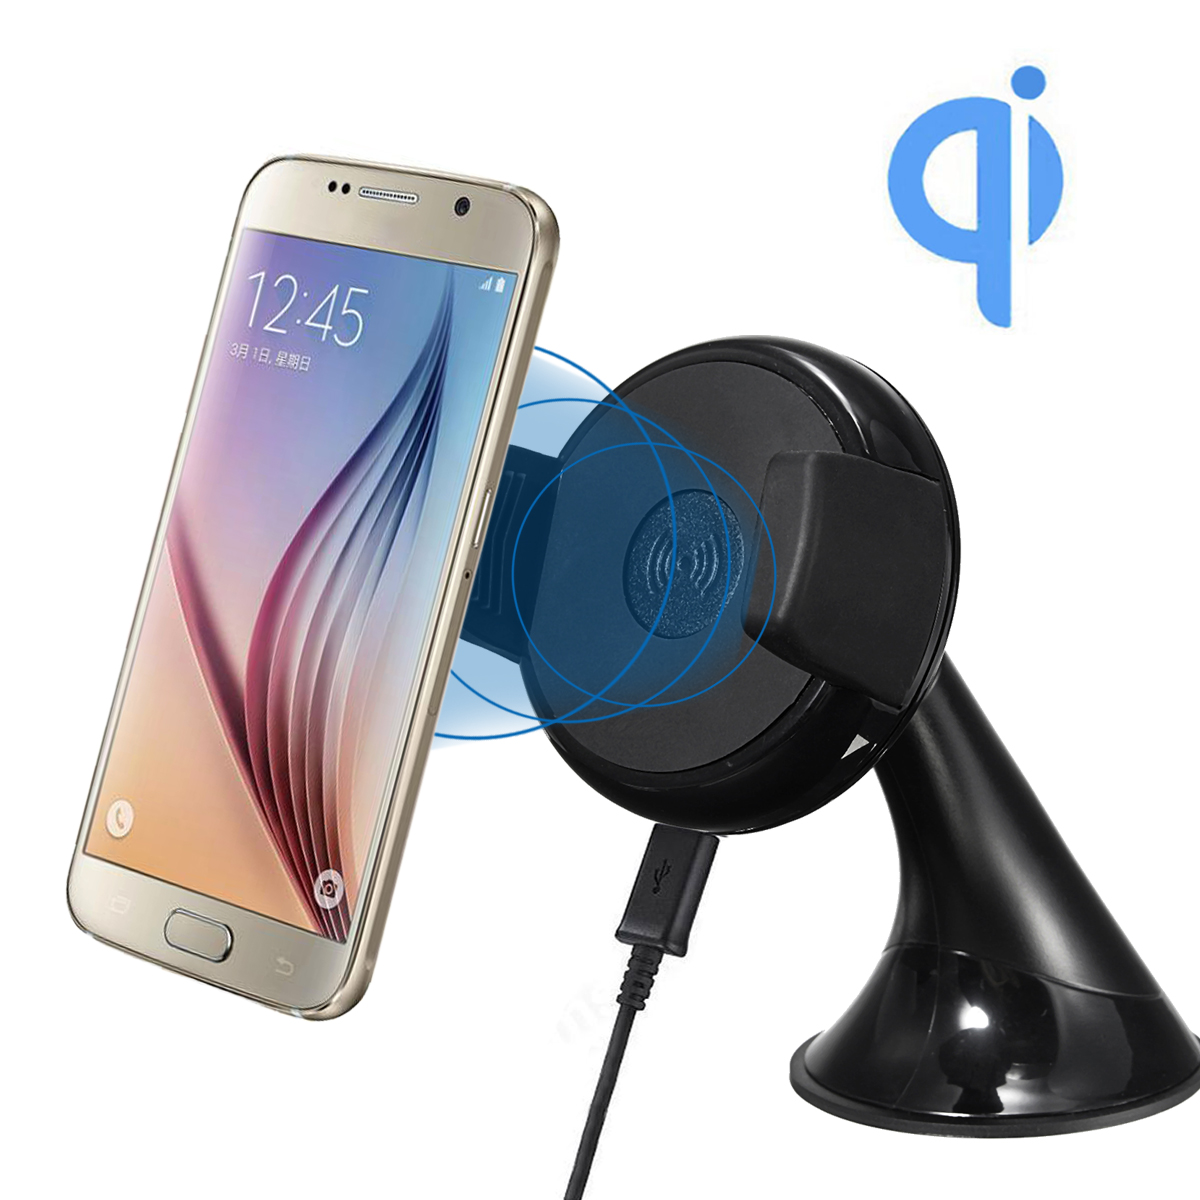 

Qi 5V 2A Wireless Car Charger Dock Wind Shield Mount Phone Holder For Mobile Phone